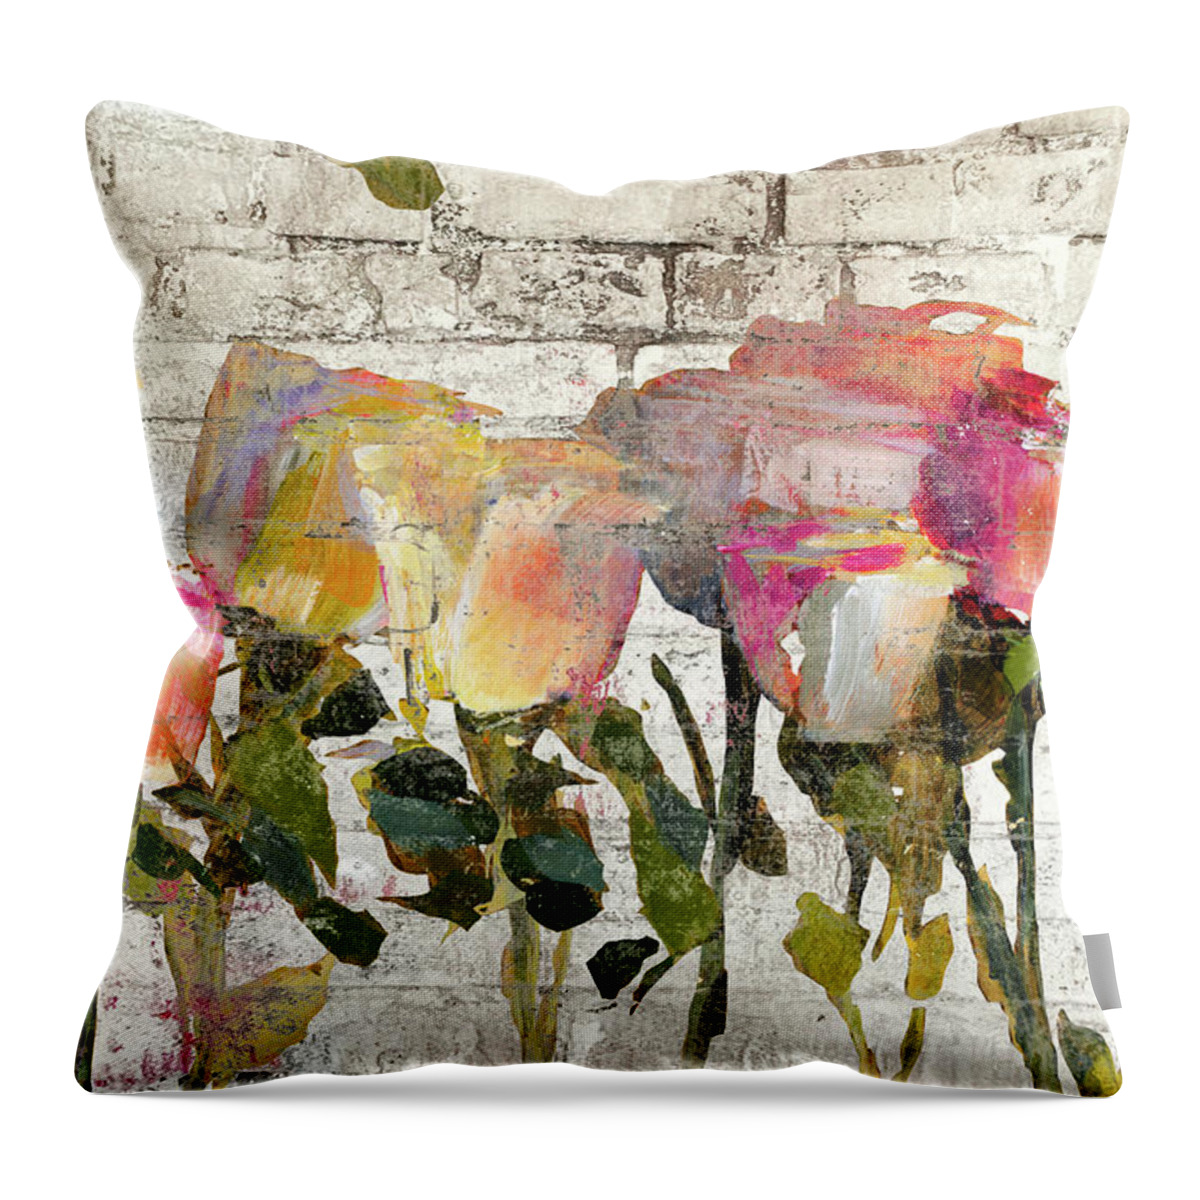 Long Throw Pillow featuring the mixed media Long Stems On Brick by Lanie Loreth